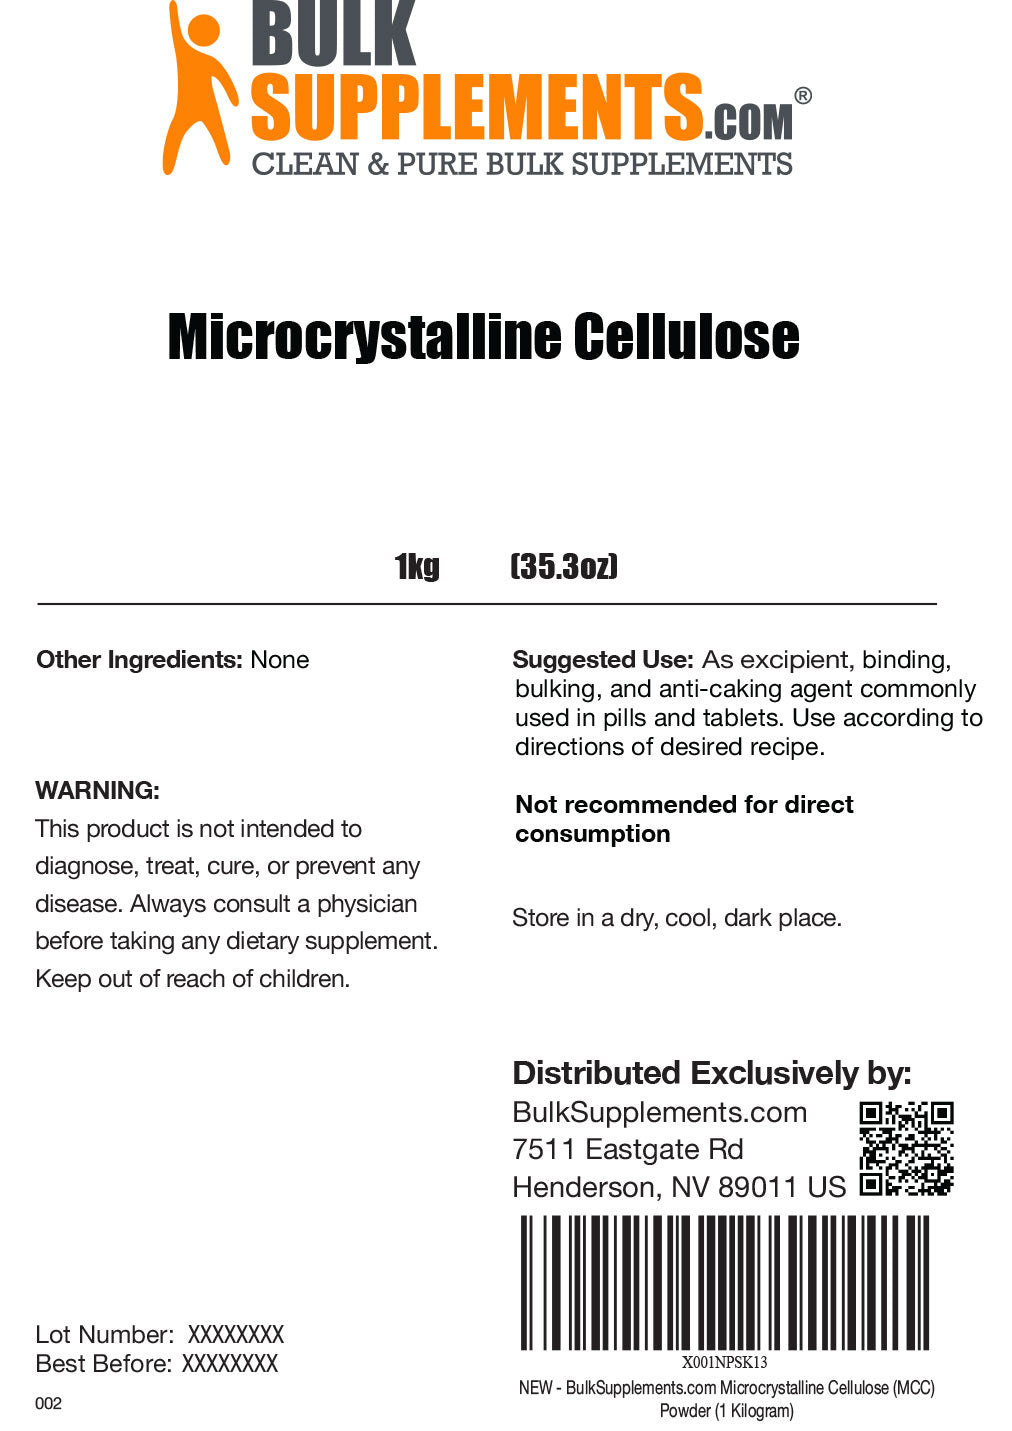 Suggested Use and Warnings Microcrystalline Cellulose